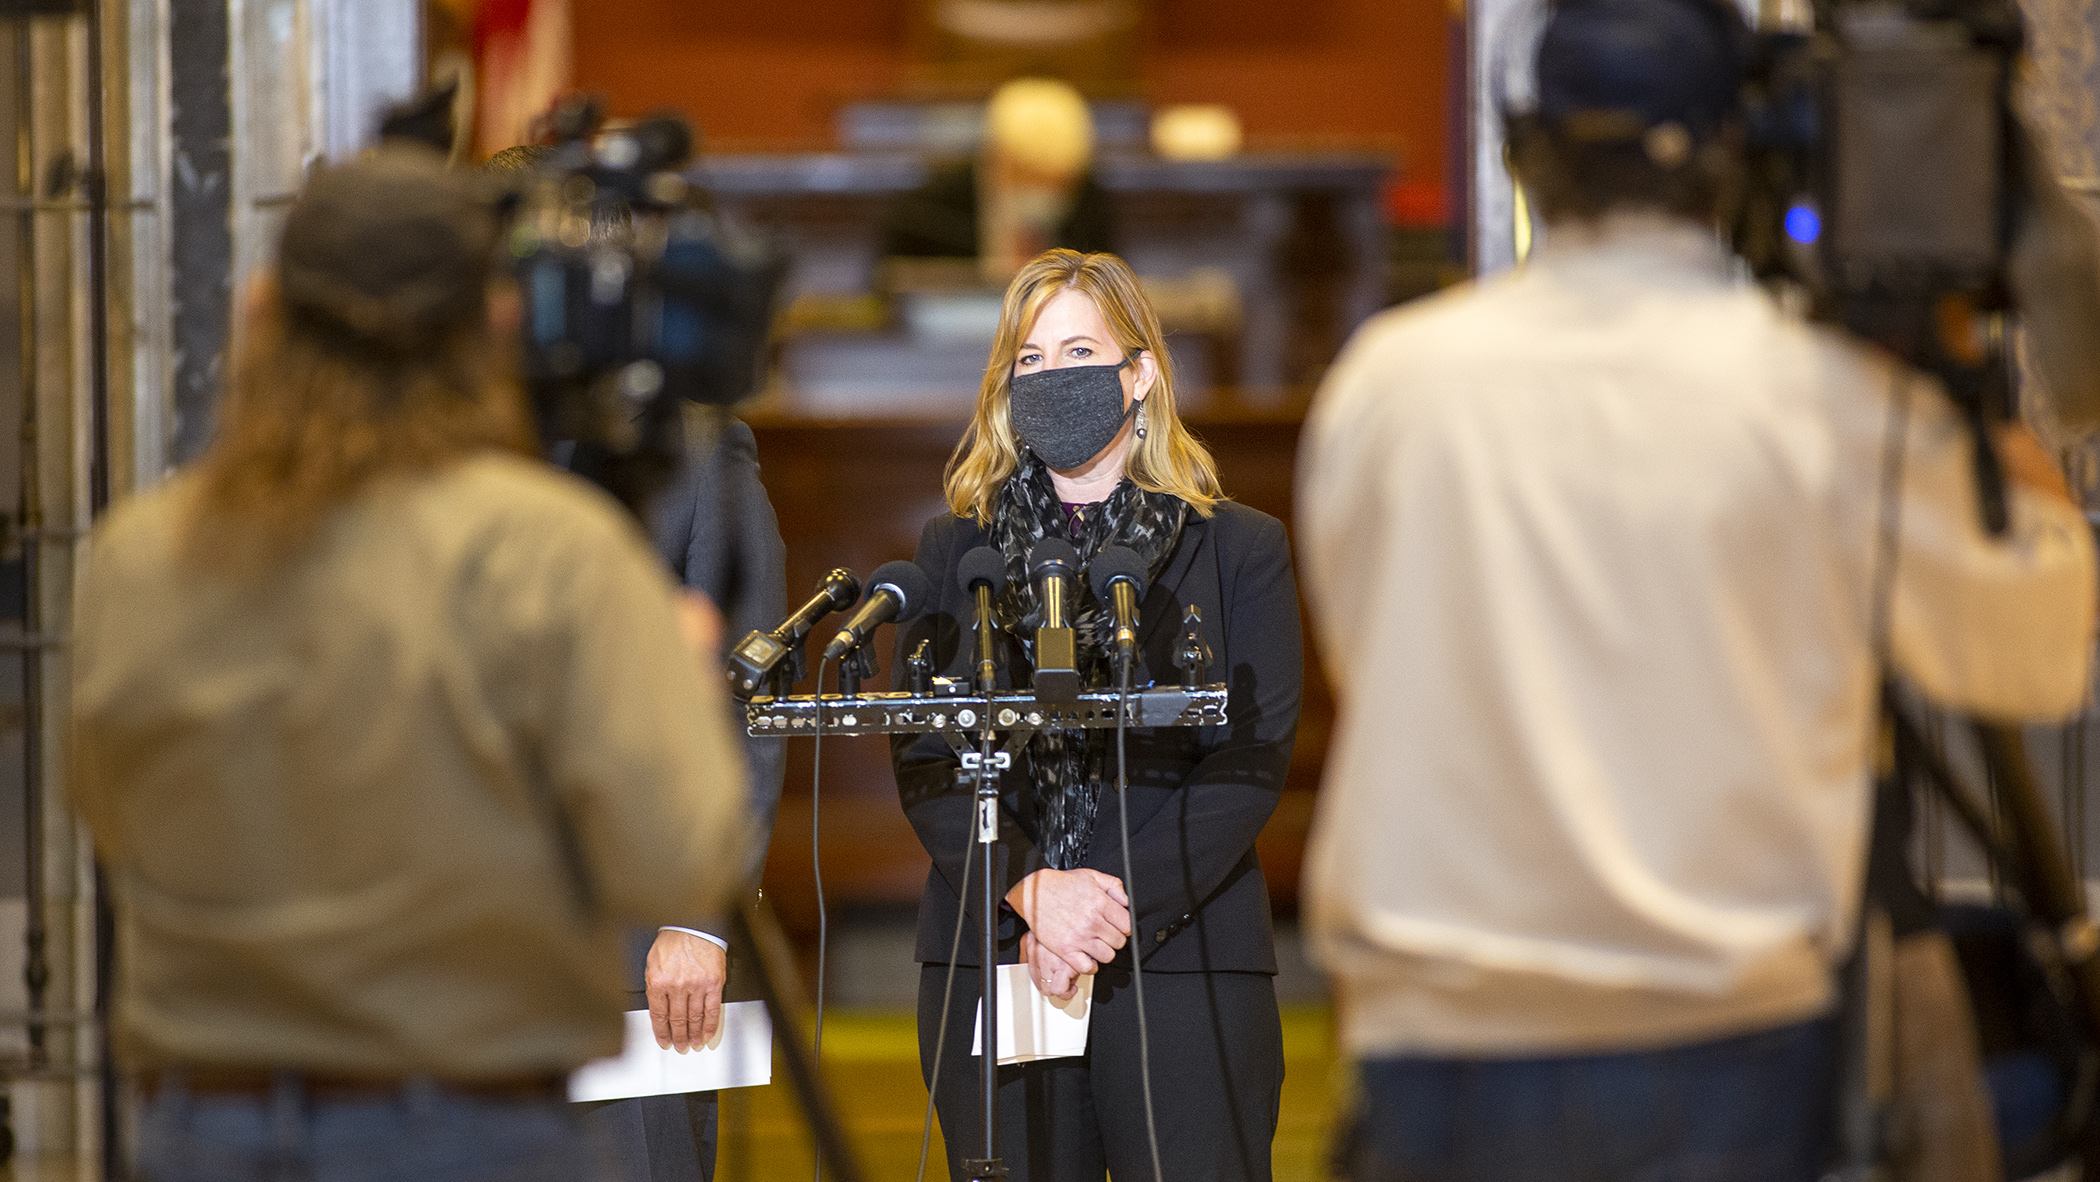 House Speaker Melissa Hortman addresses the media Oct. 14 before the House was to take up a capital investment and supplemental budget bill during the year's fifth special session. Photo by Paul Battaglia